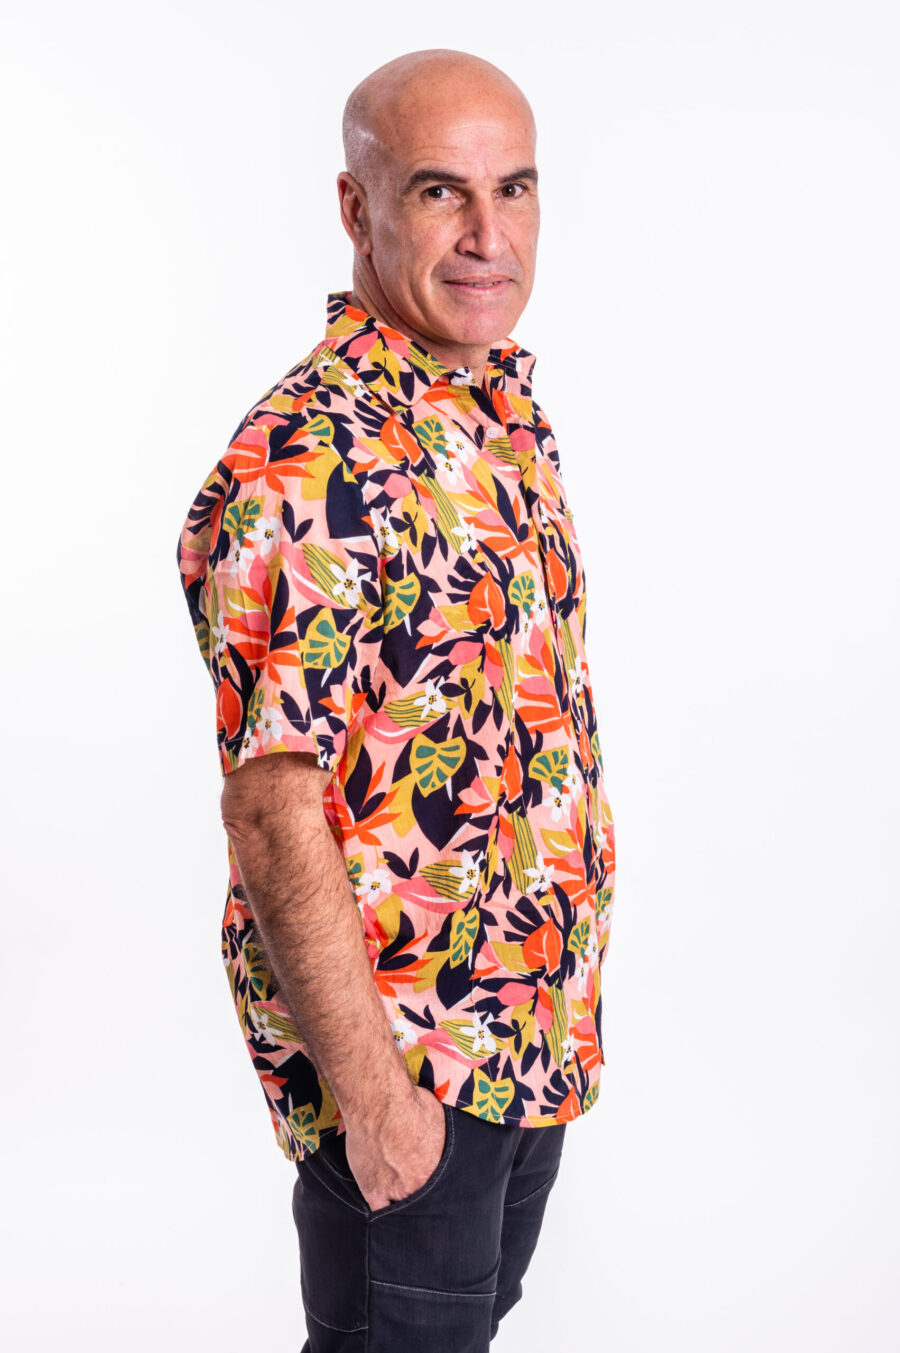 Unisex buttoned shirt for men and women | A light orange-pink buttoned shirt with tropical print - a unique design